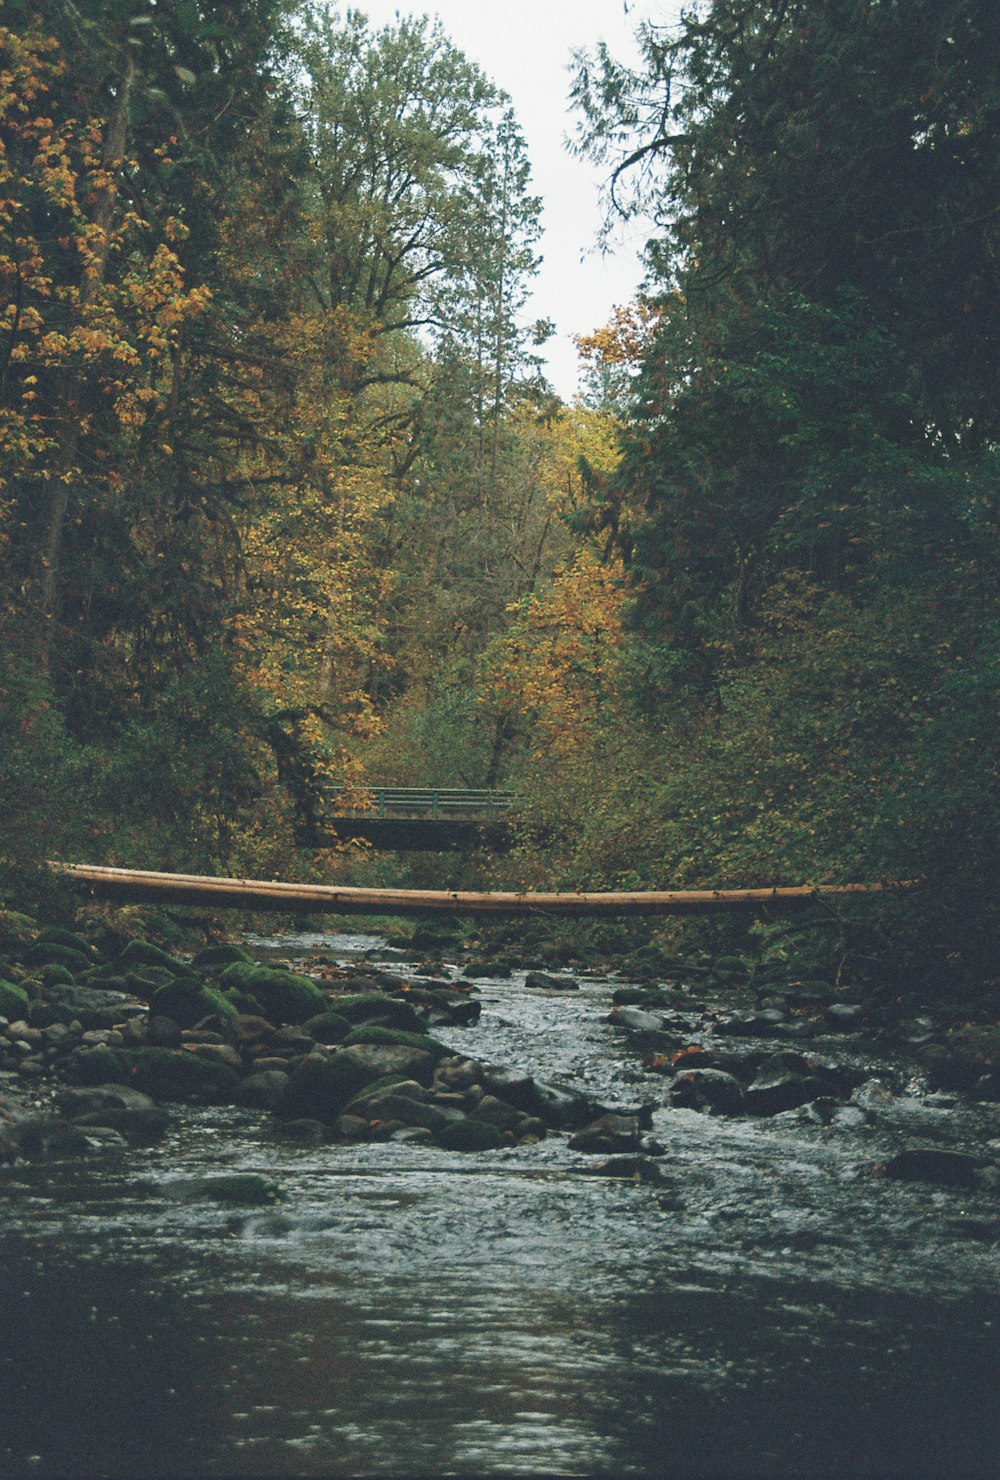 a bridge over a river in the middle of a forest